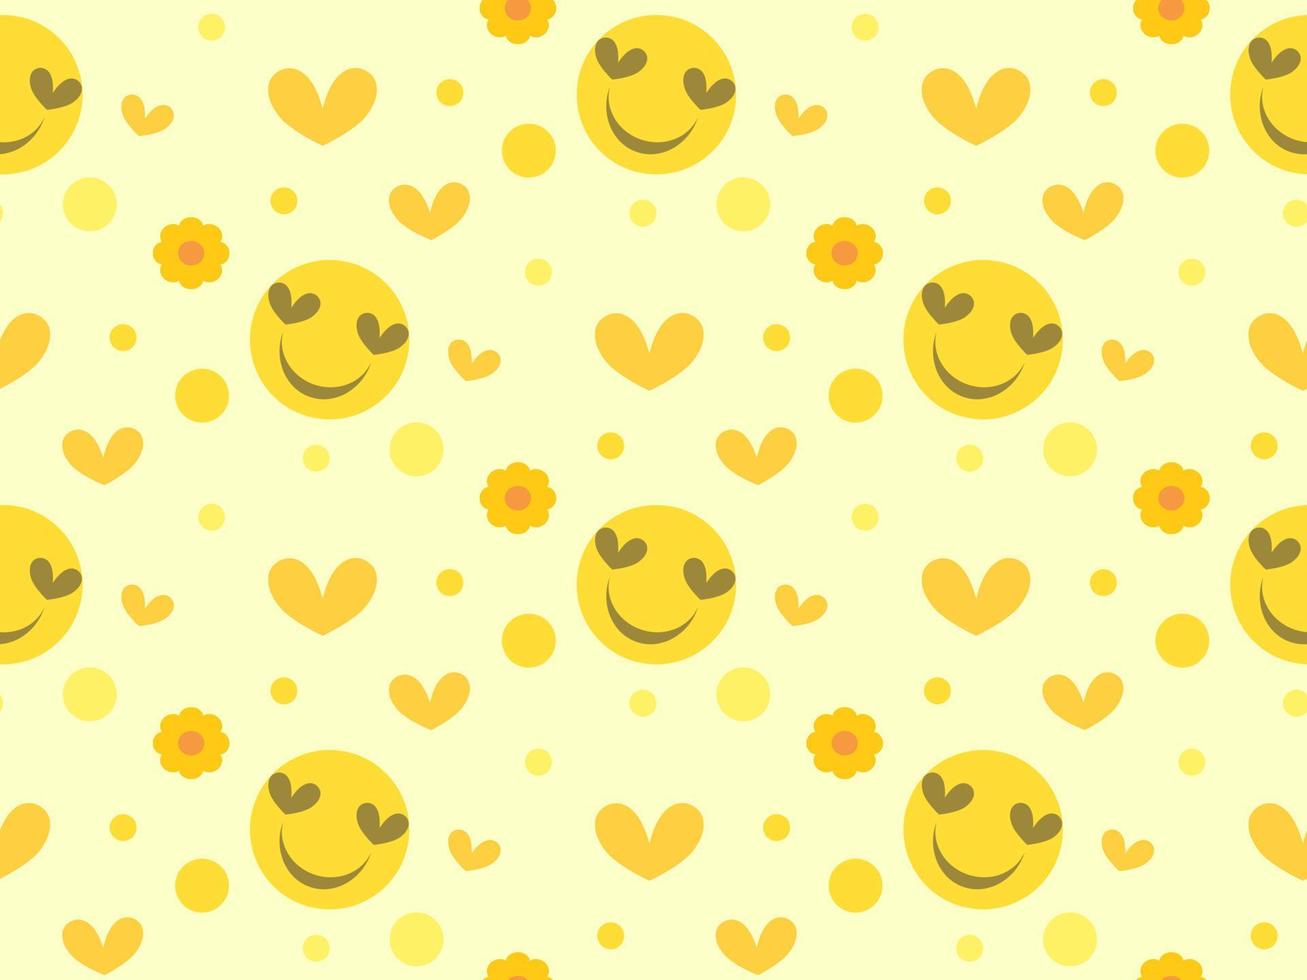 smile cartoon character seamless pattern on yellow background vector